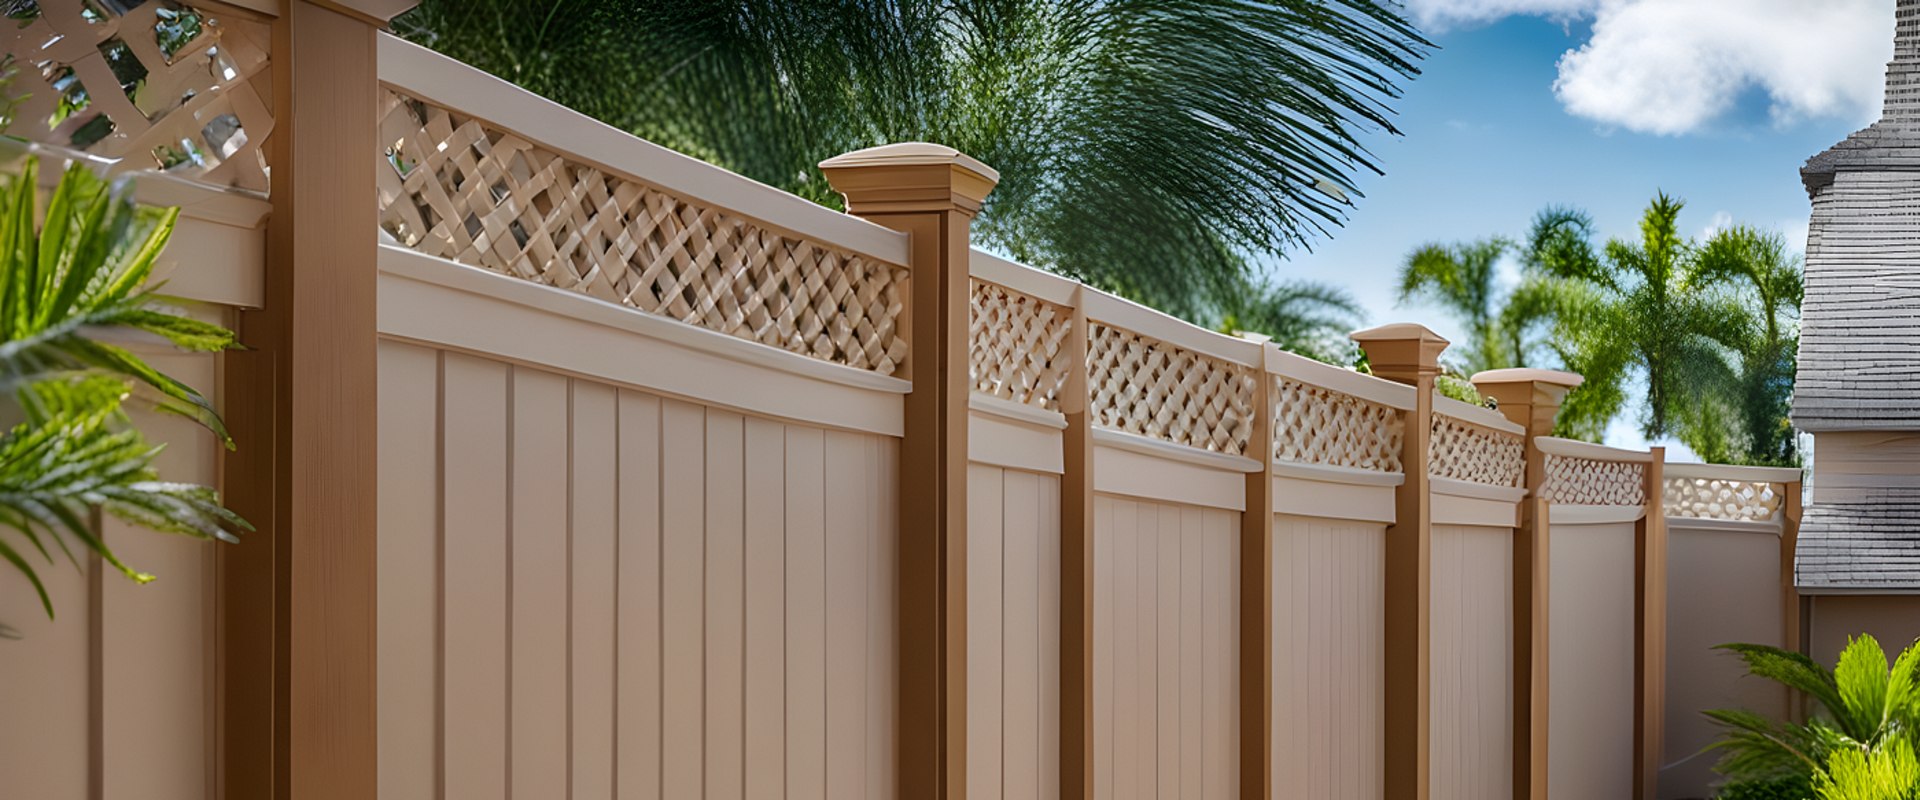 Why Vinyl Fencing Is The Perfect Home Renovation Choice For Cape Coral